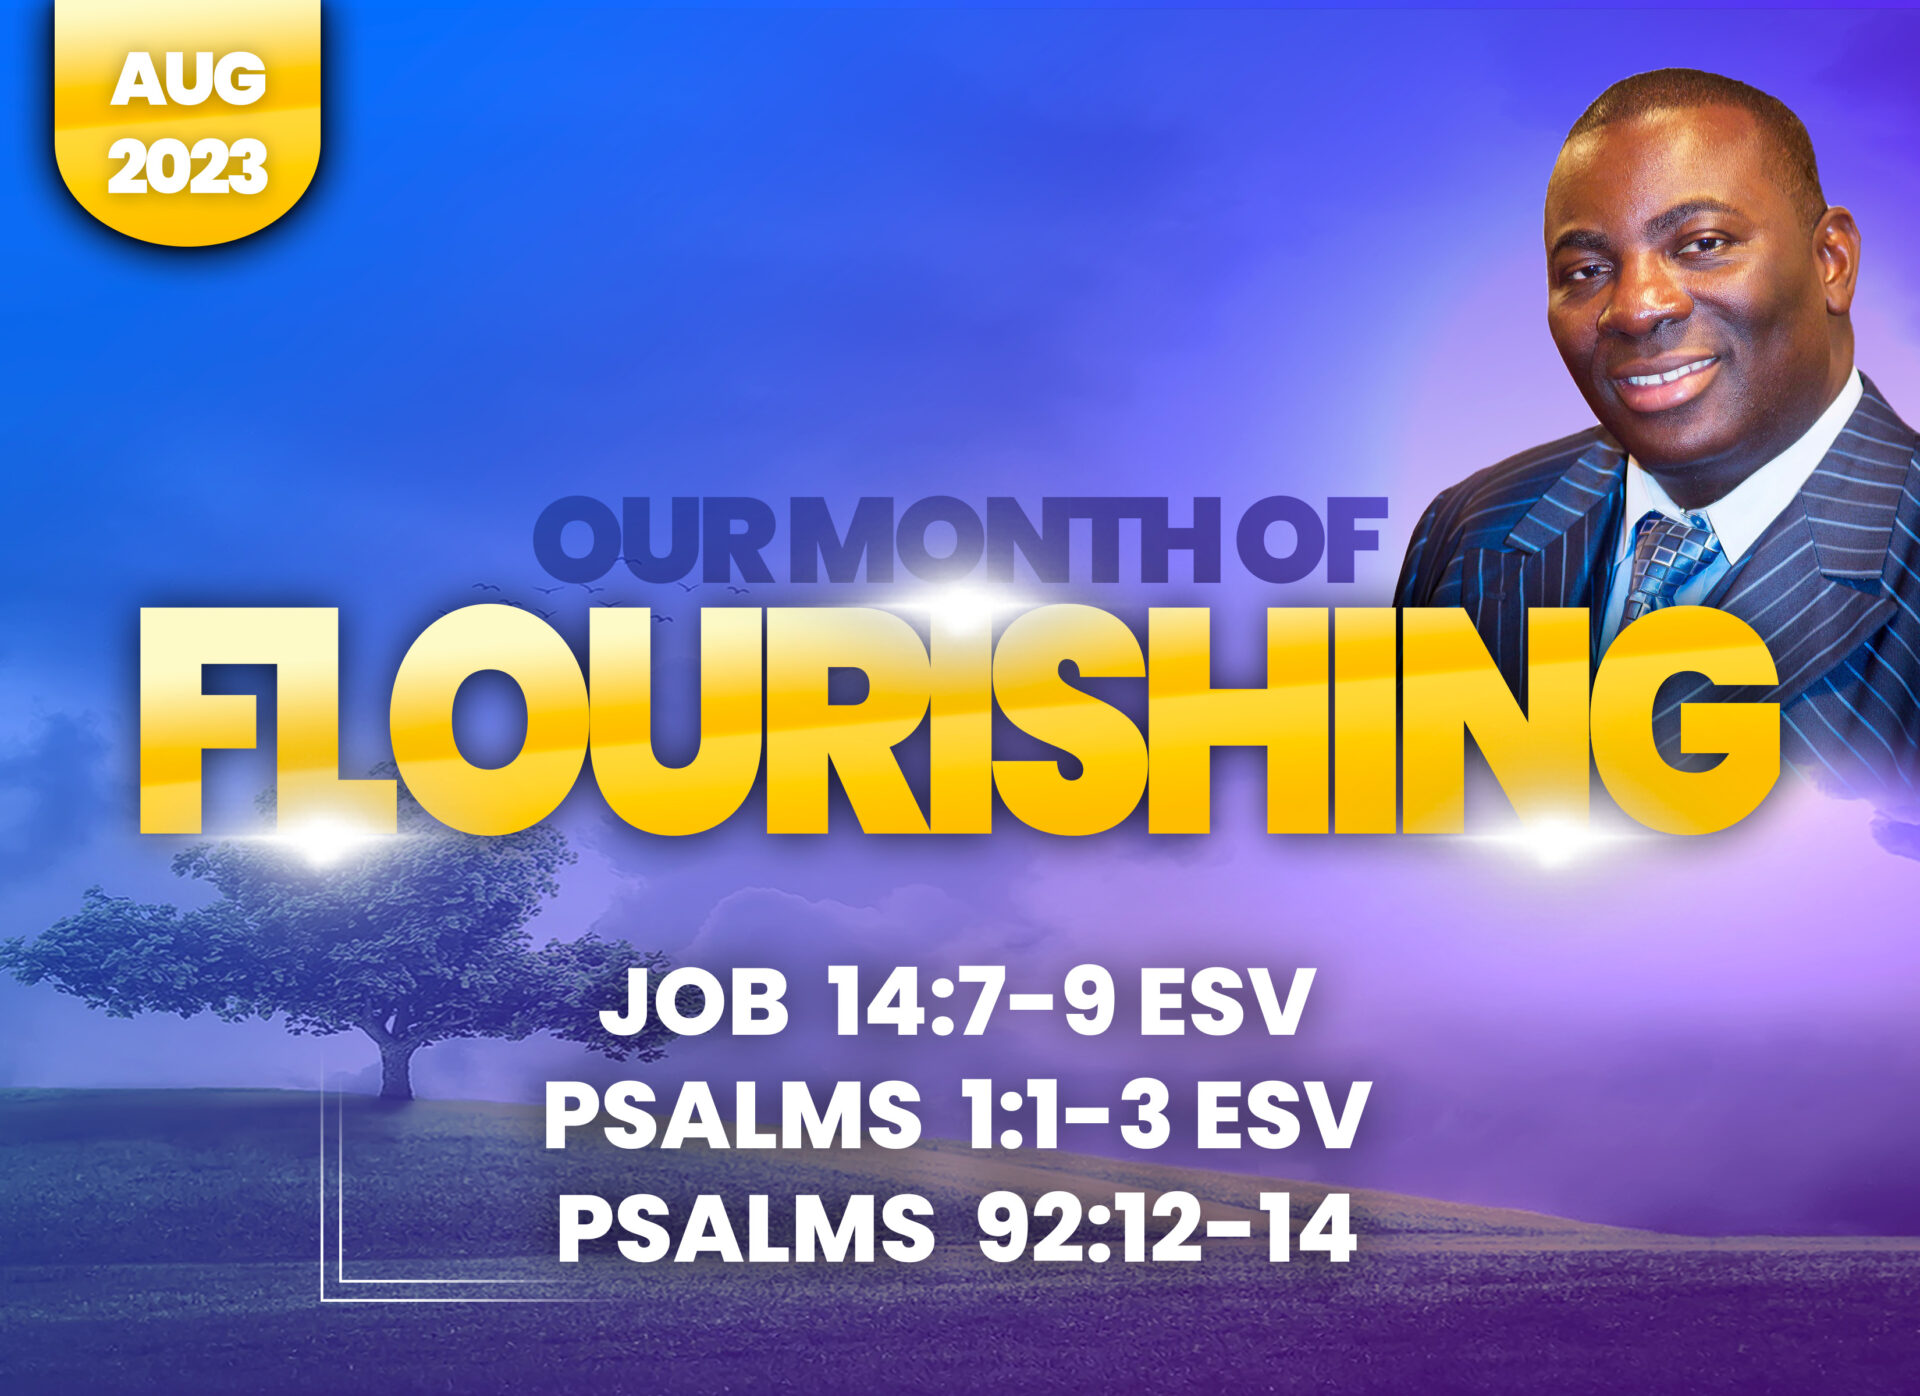 You are currently viewing Our Month of FLOURISHING